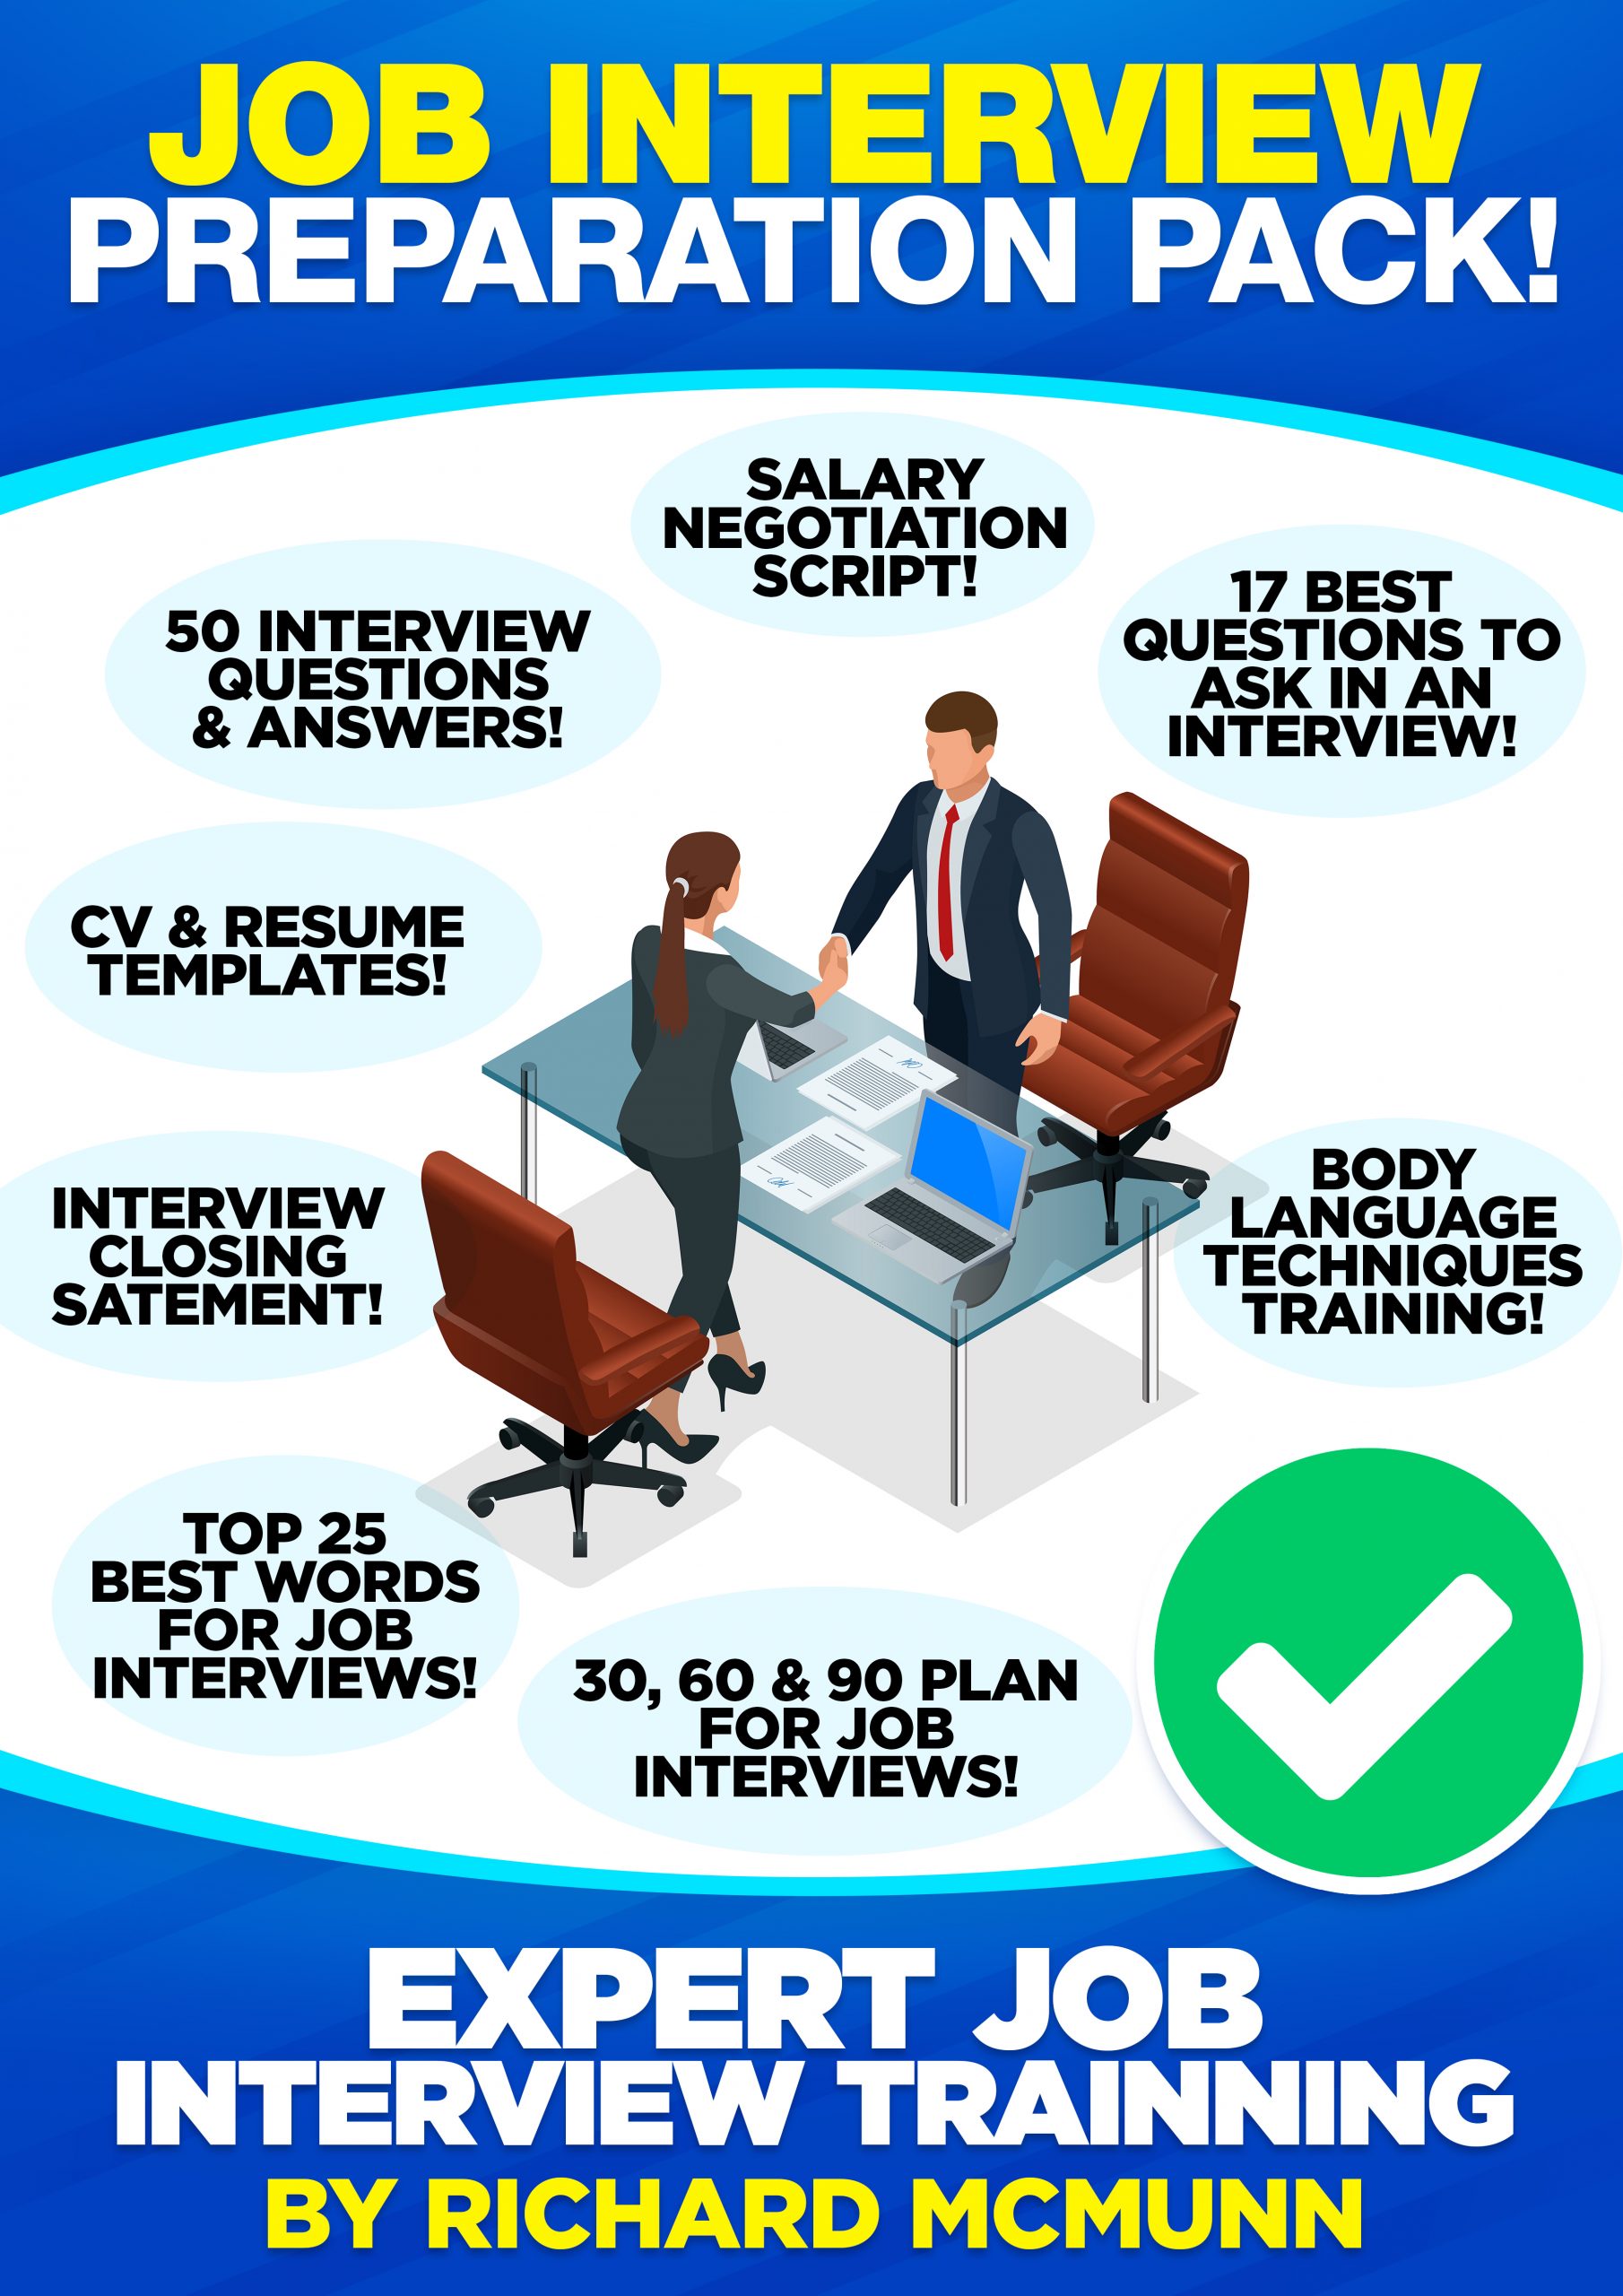 JOB INTERVIEW Preparation Pack Scaled 